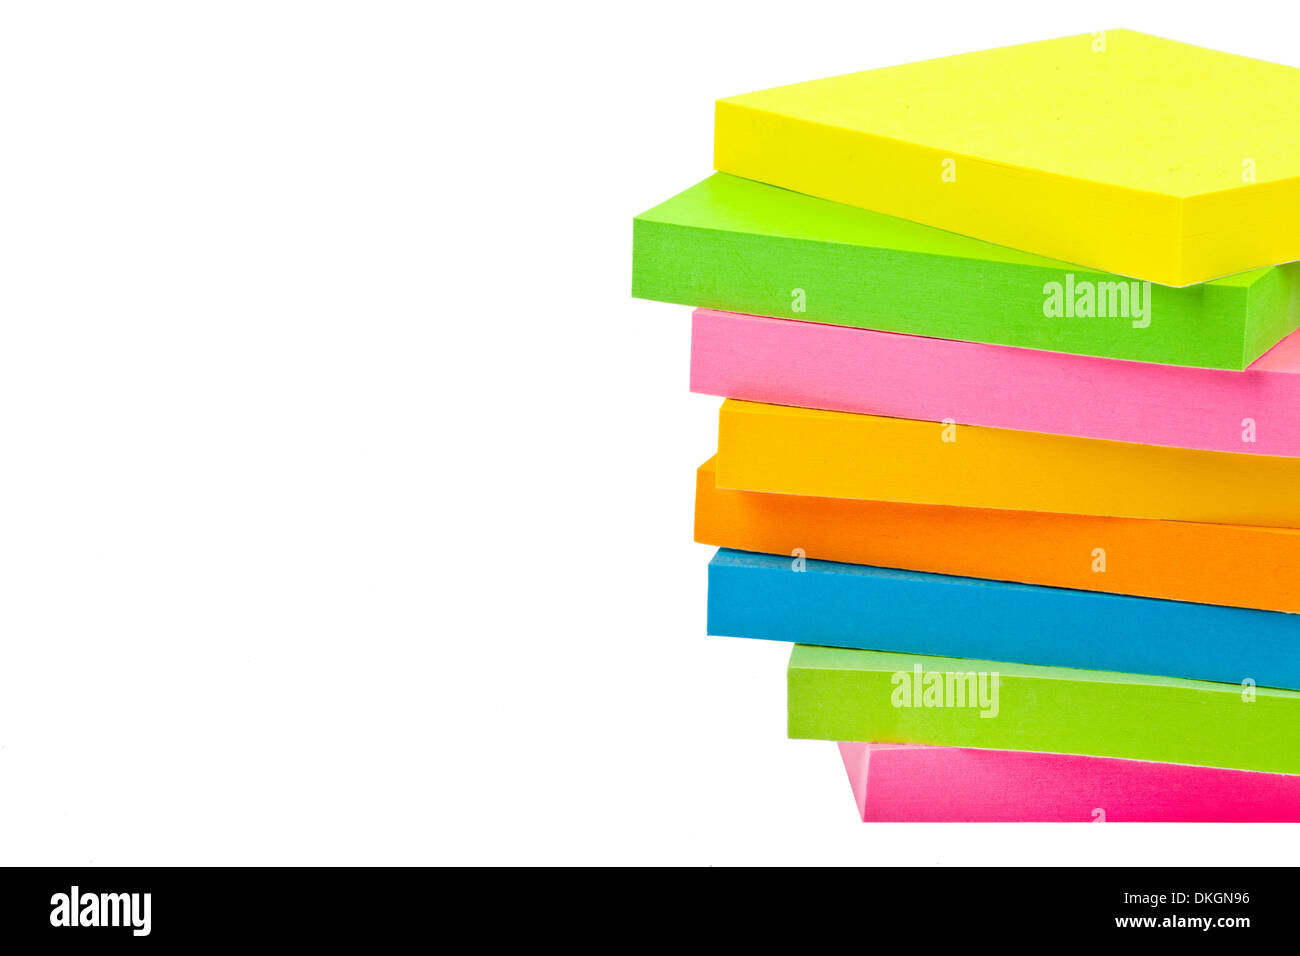 Stack of Sticky Note Pads over a white background Stock Photo - Alamy